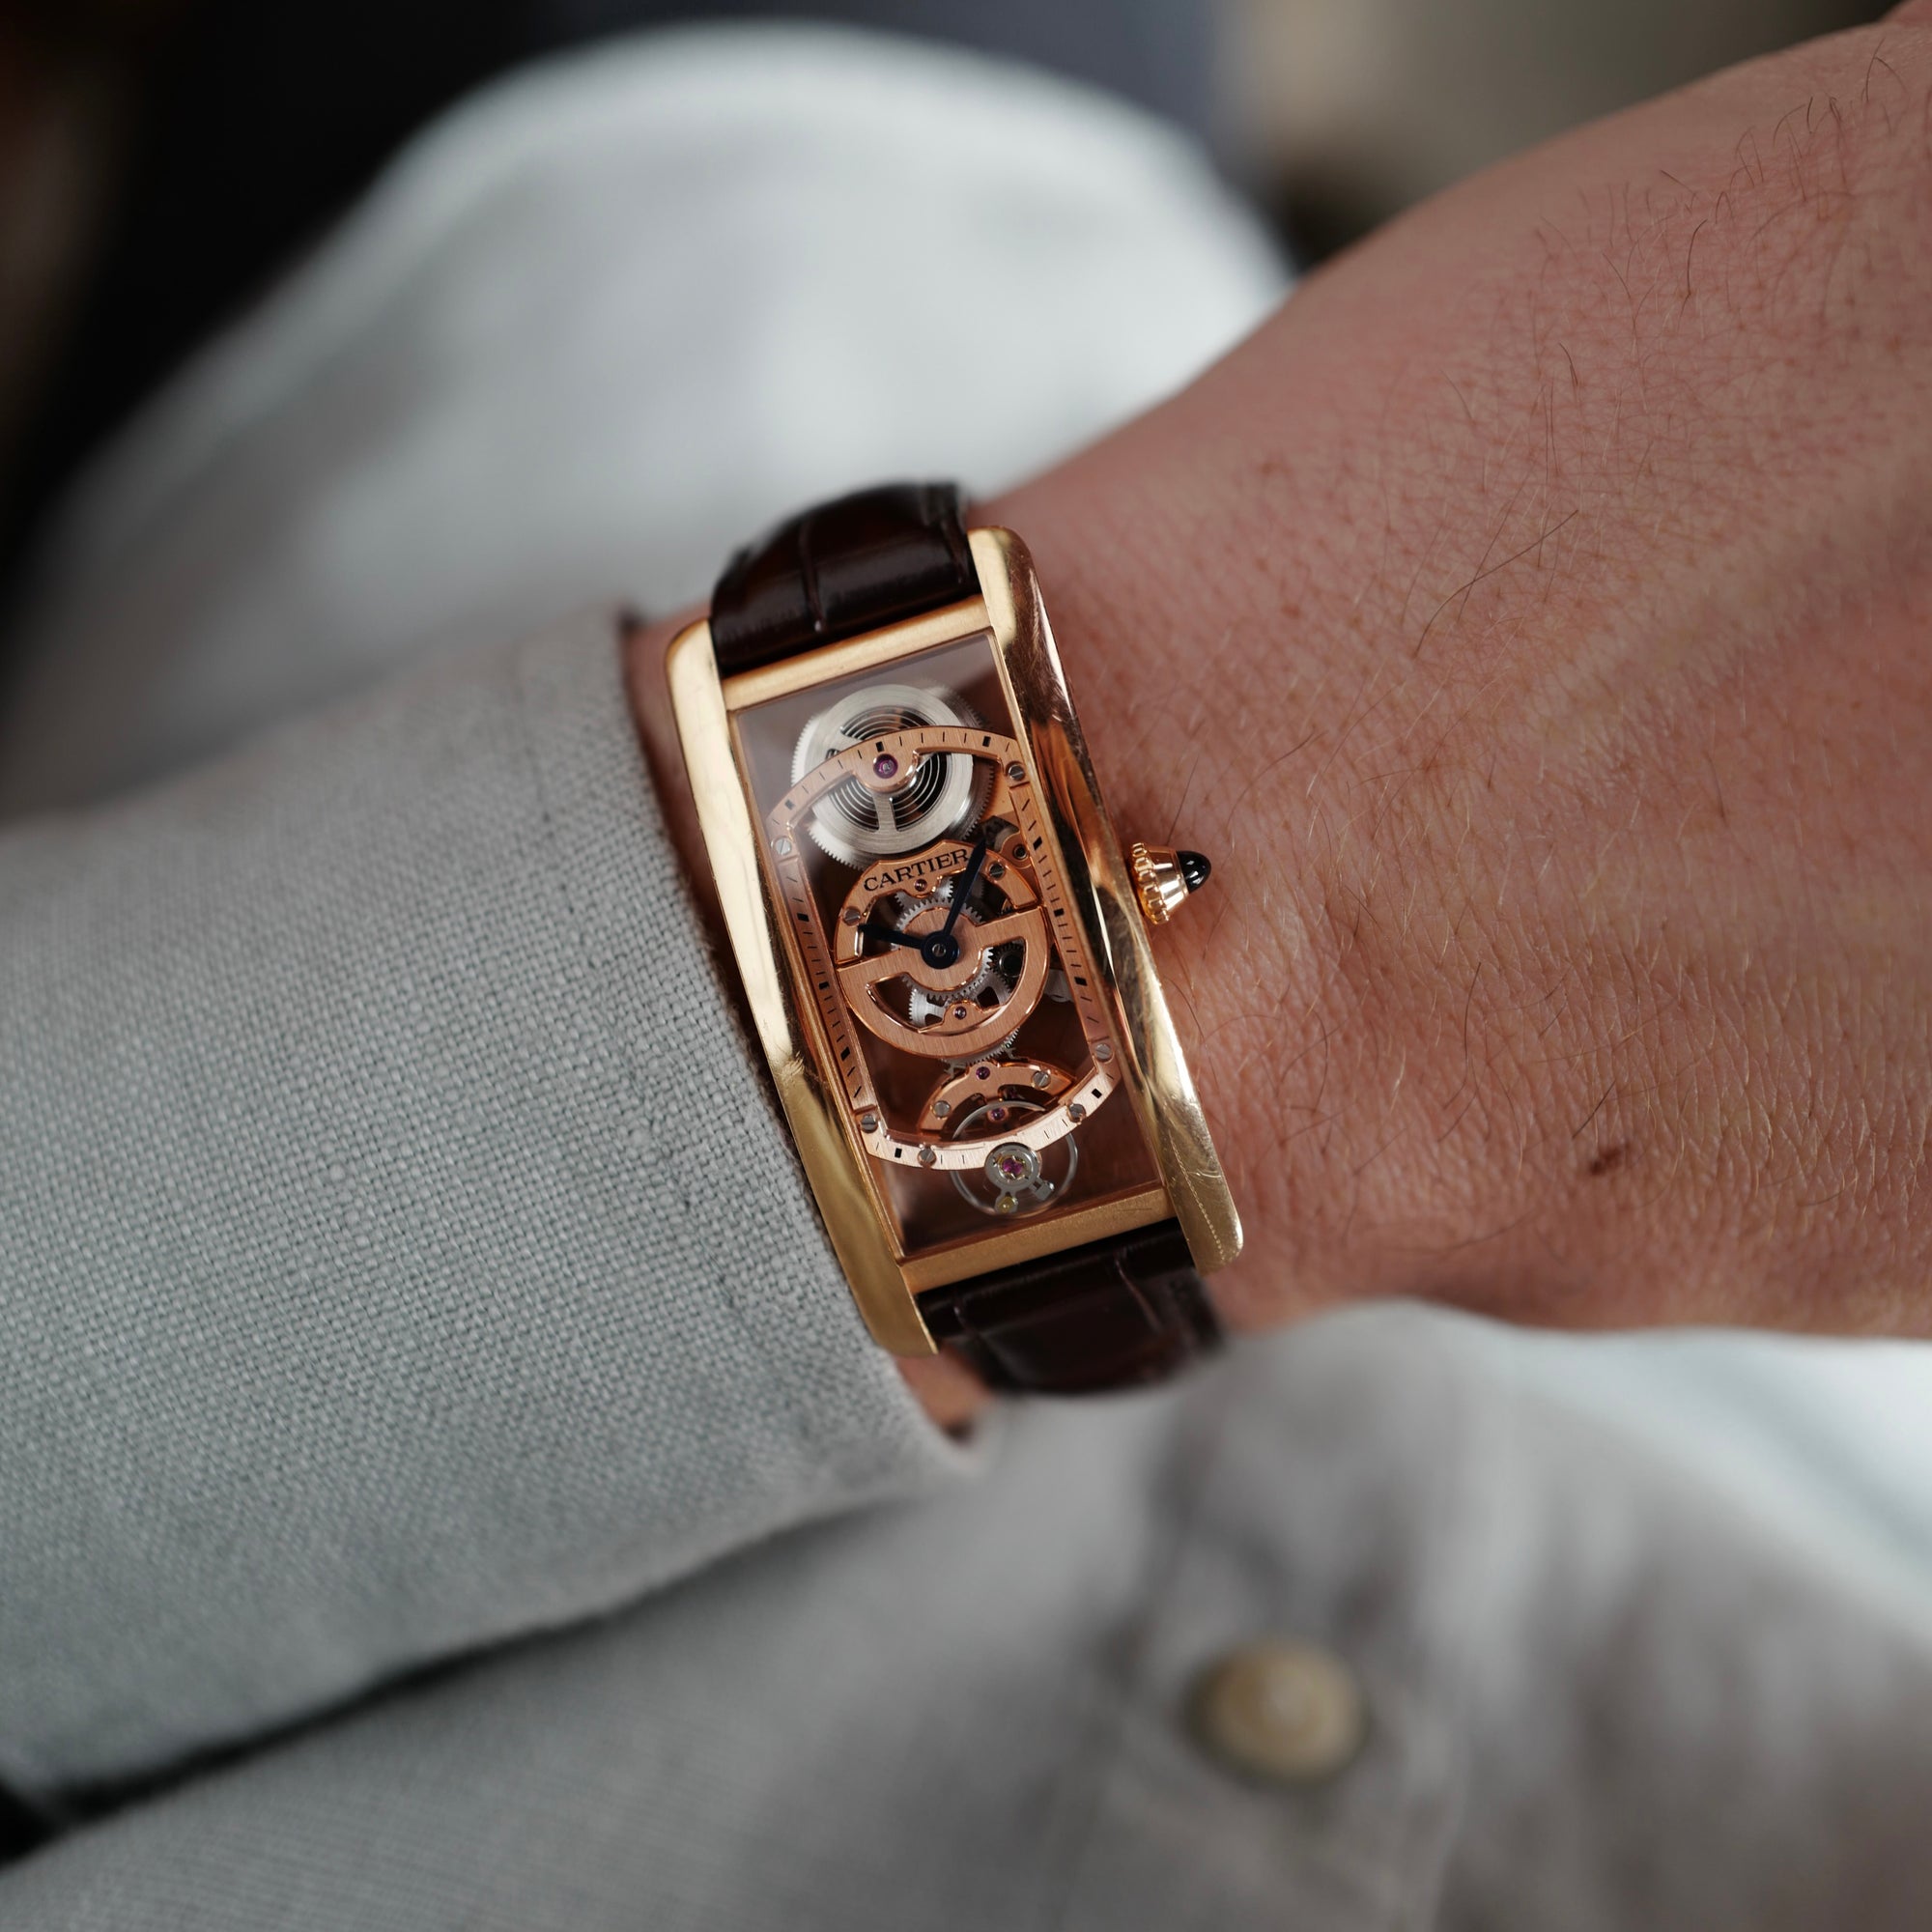 Cartier - Cartier Rose Gold Tank Cintree Skeleton Ref. 3974 - The Keystone Watches